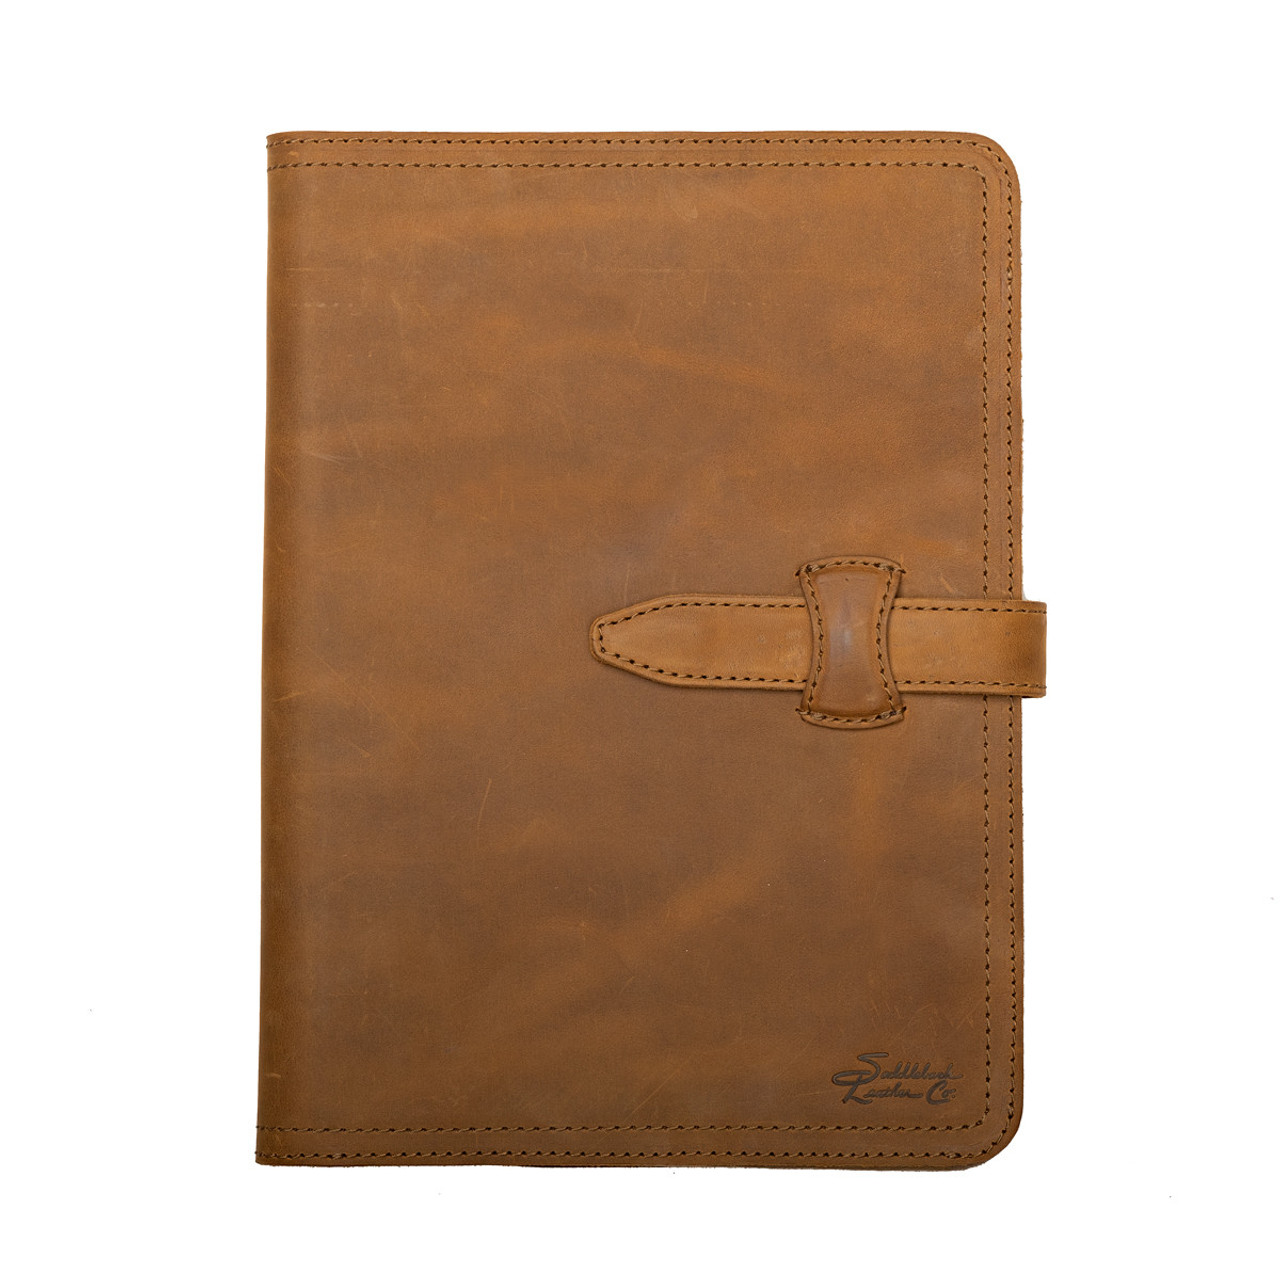 How I use card slots in my Franklin Covey Leather Unstructured Binder  Planner 